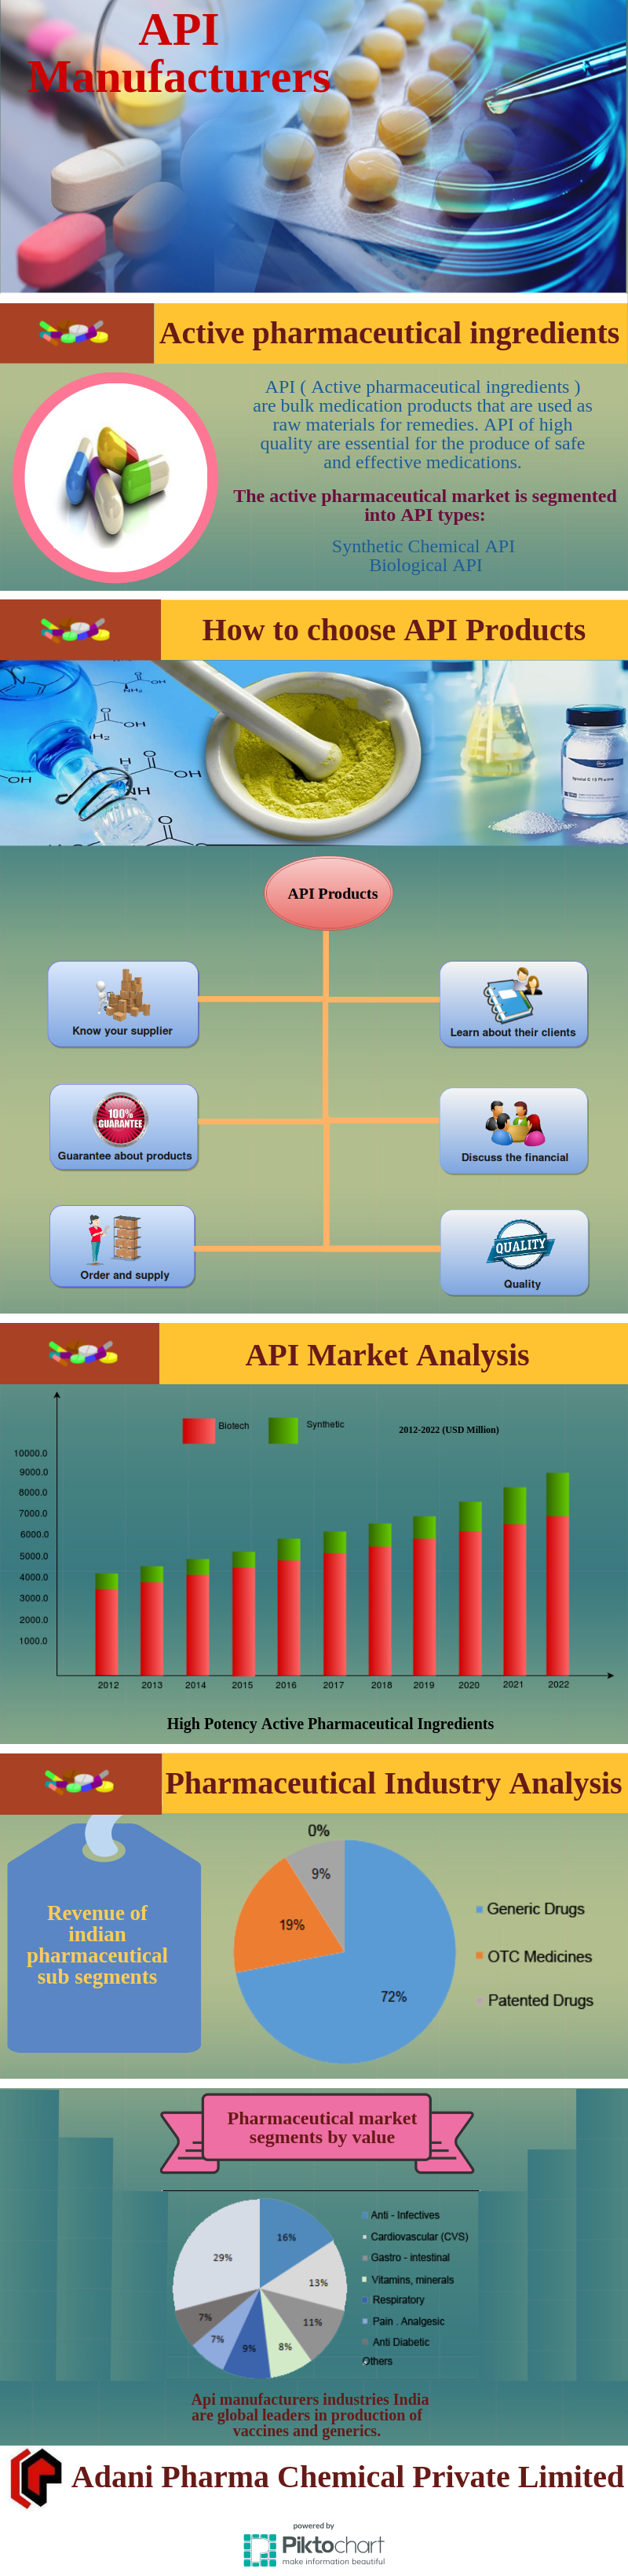 Api Manufacturers Industry Is Quickly Growth In The Last Few Years